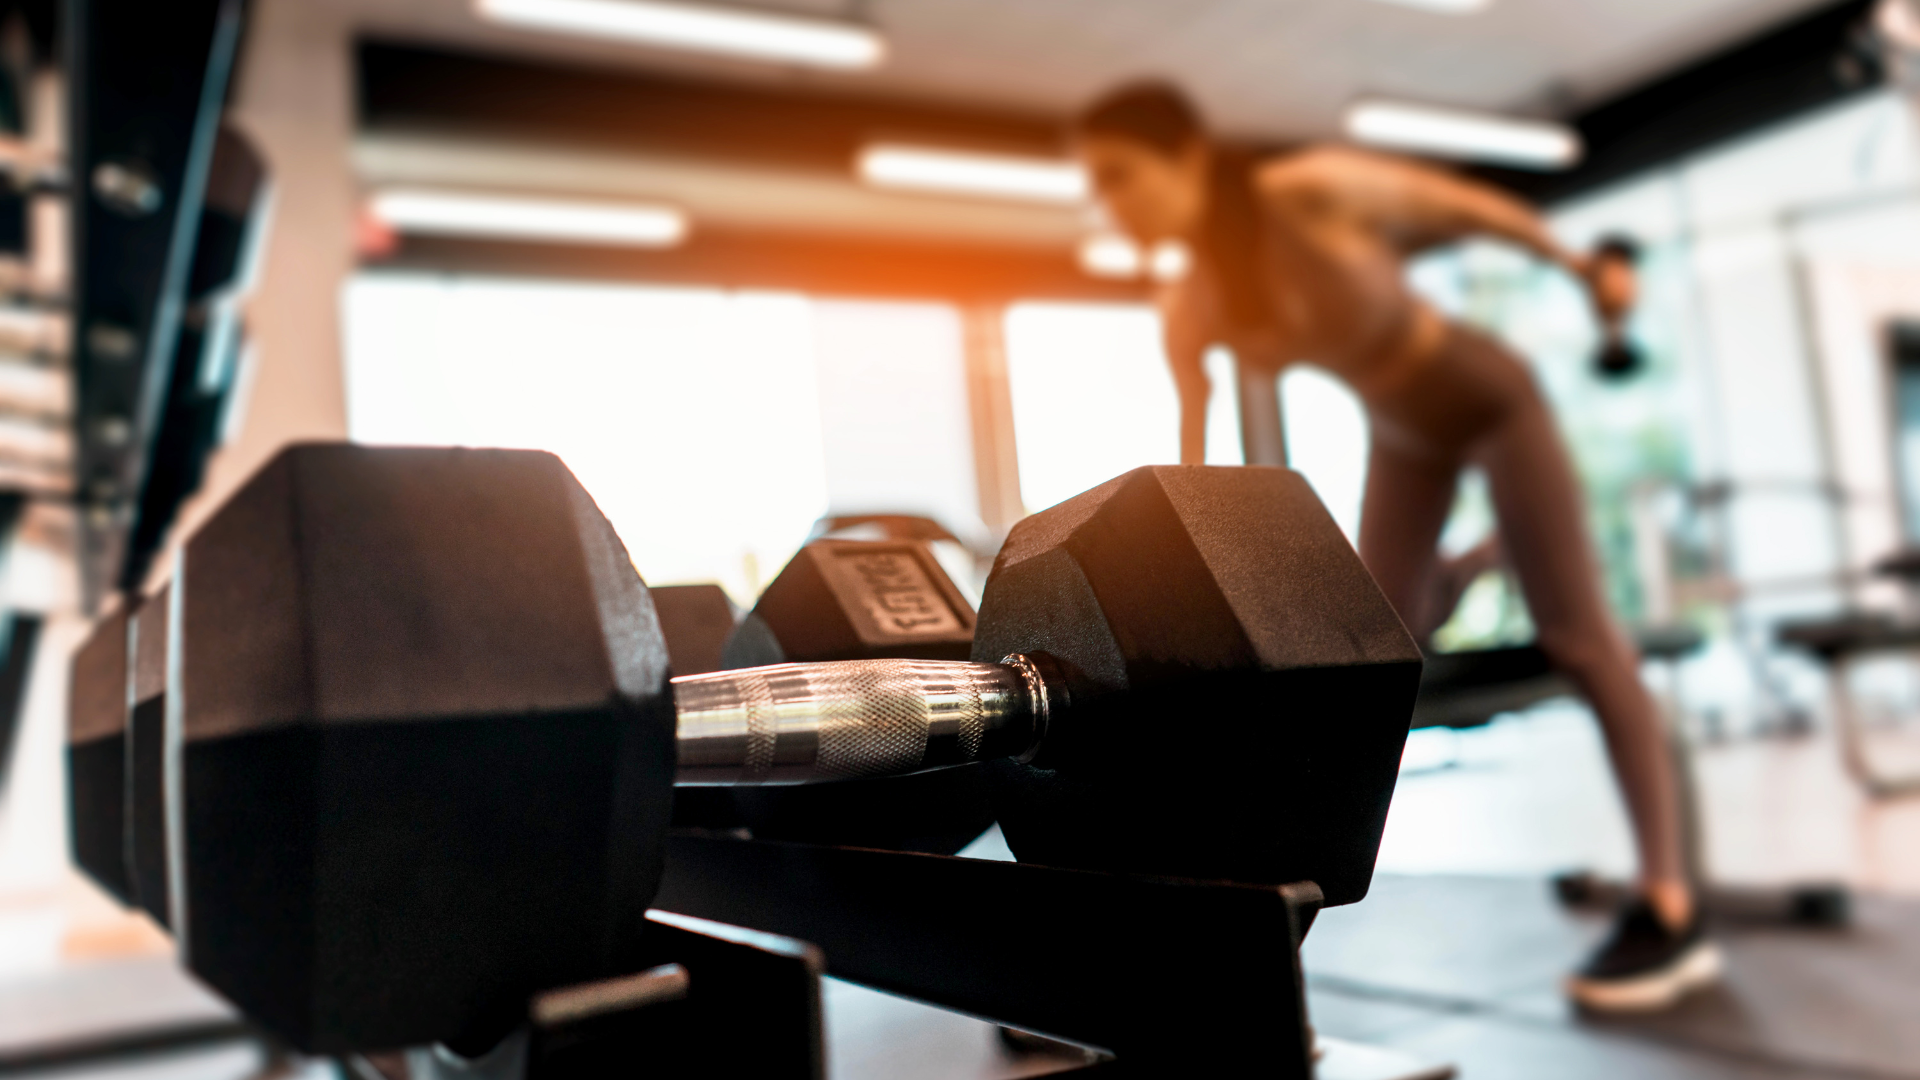 The 15 Best Hotel Gym Workouts